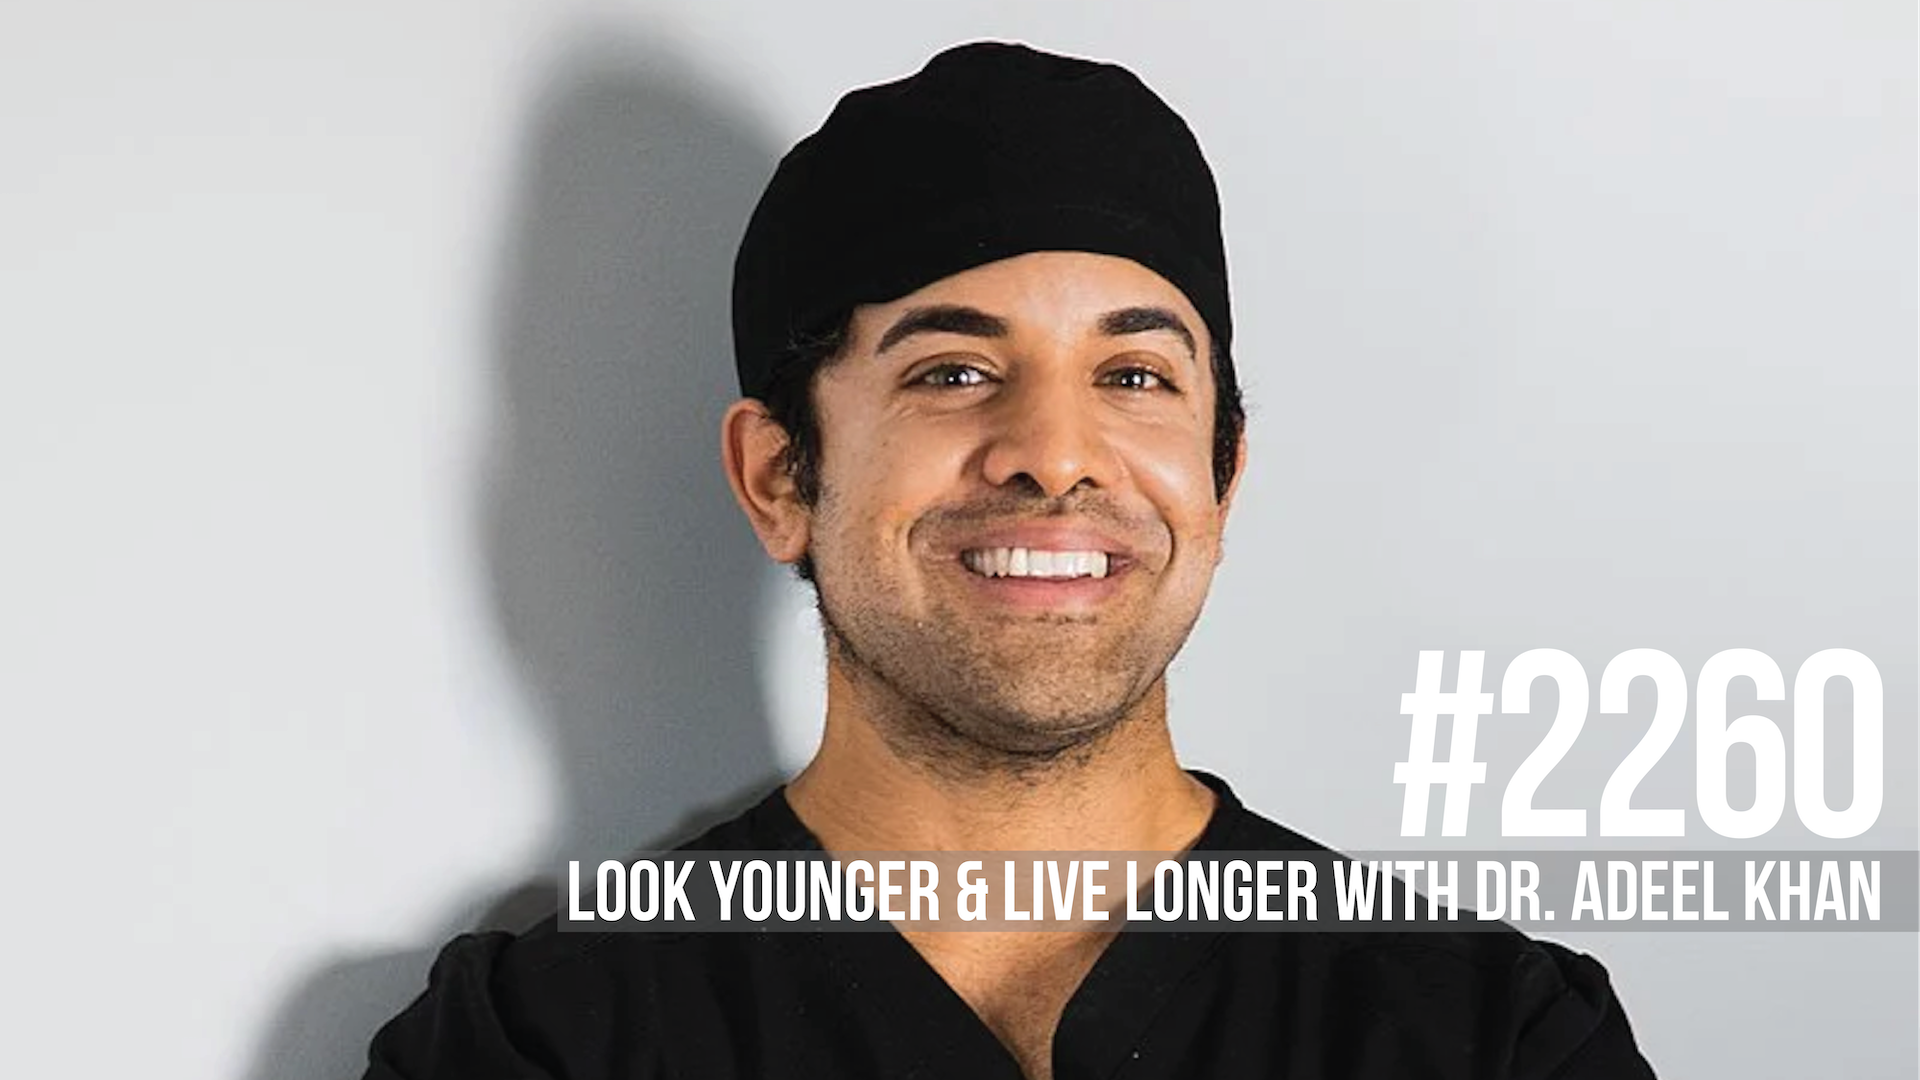 2260: Look Younger & Live Longer With Dr. Adeel Khan